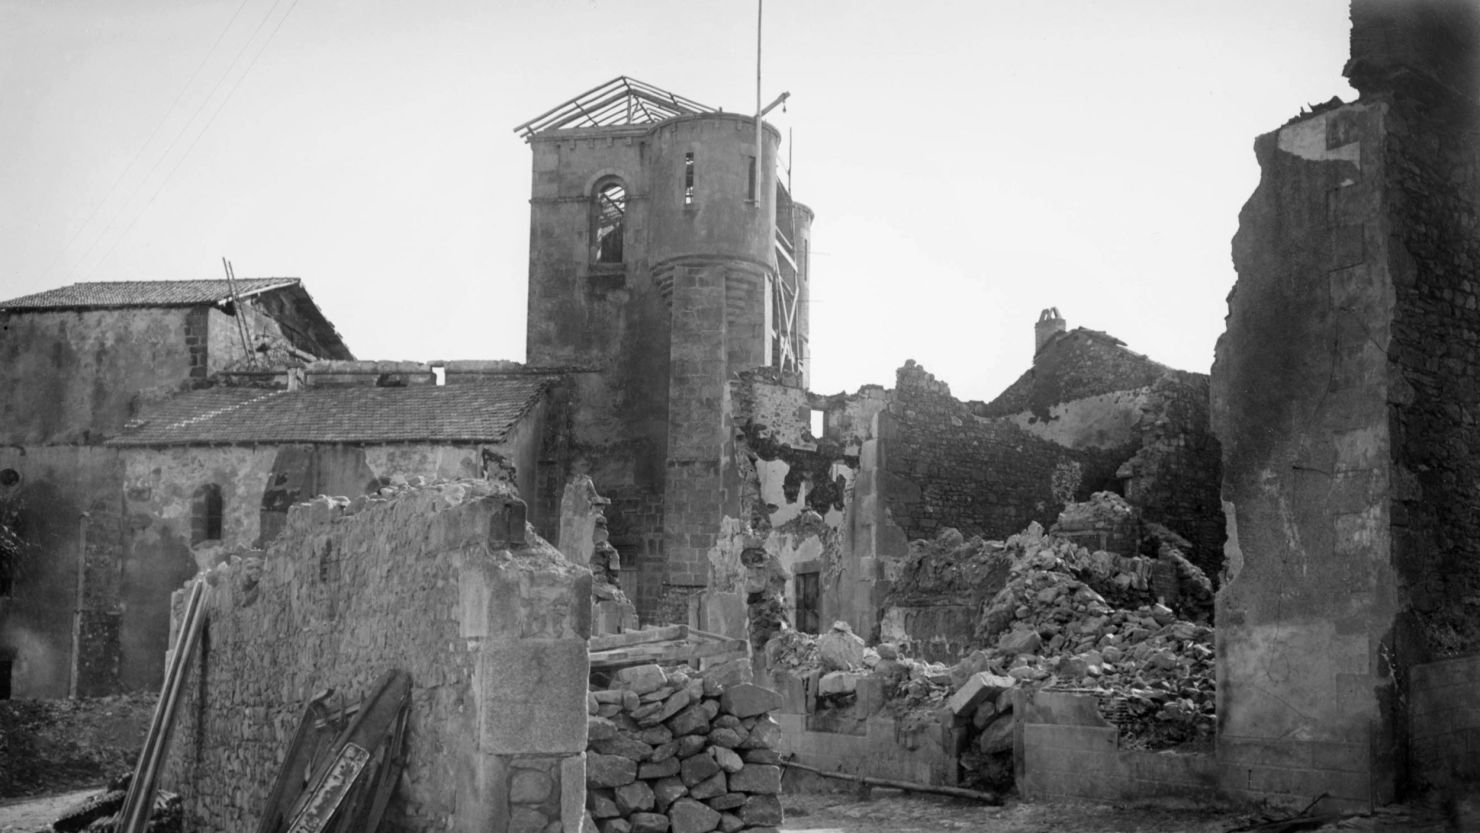 A photo shows the ruins at Oradour-sur-Glane and the church where the village's women and children were killed.